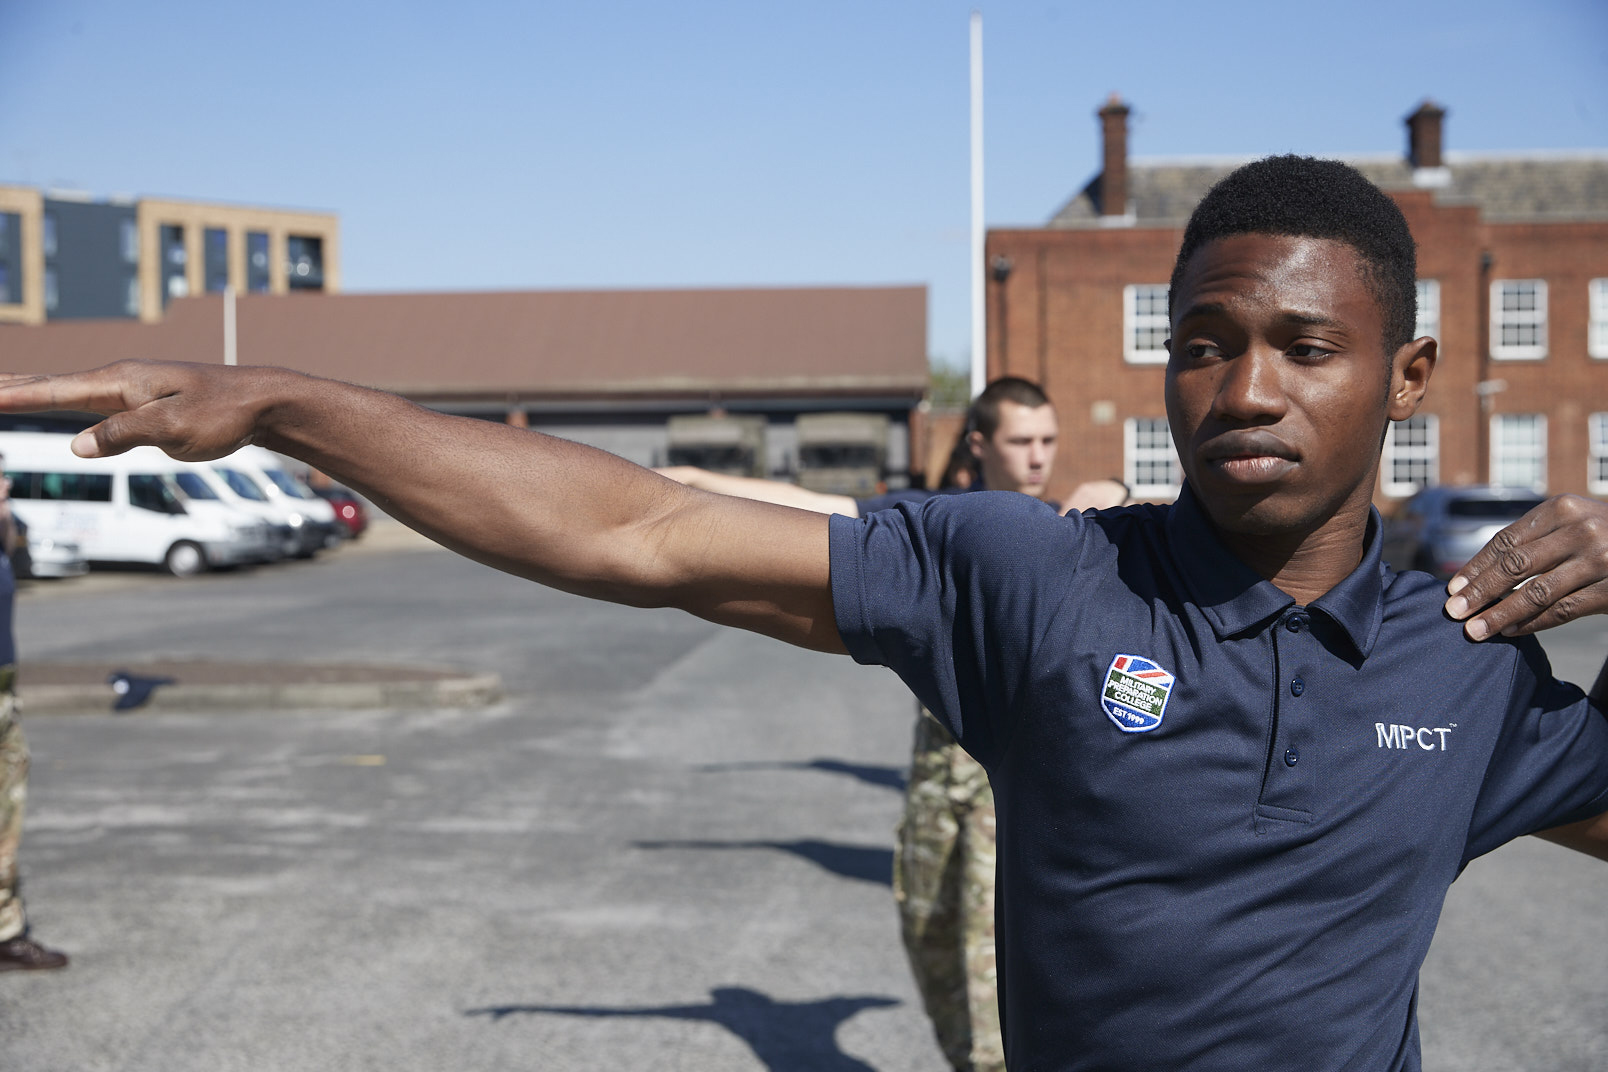 West Midlands Combined Authority and MPCT develop new opportunities for people of West Midlands to begin a career in the armed forces with fast-track introduction to Armed Forces recruiters